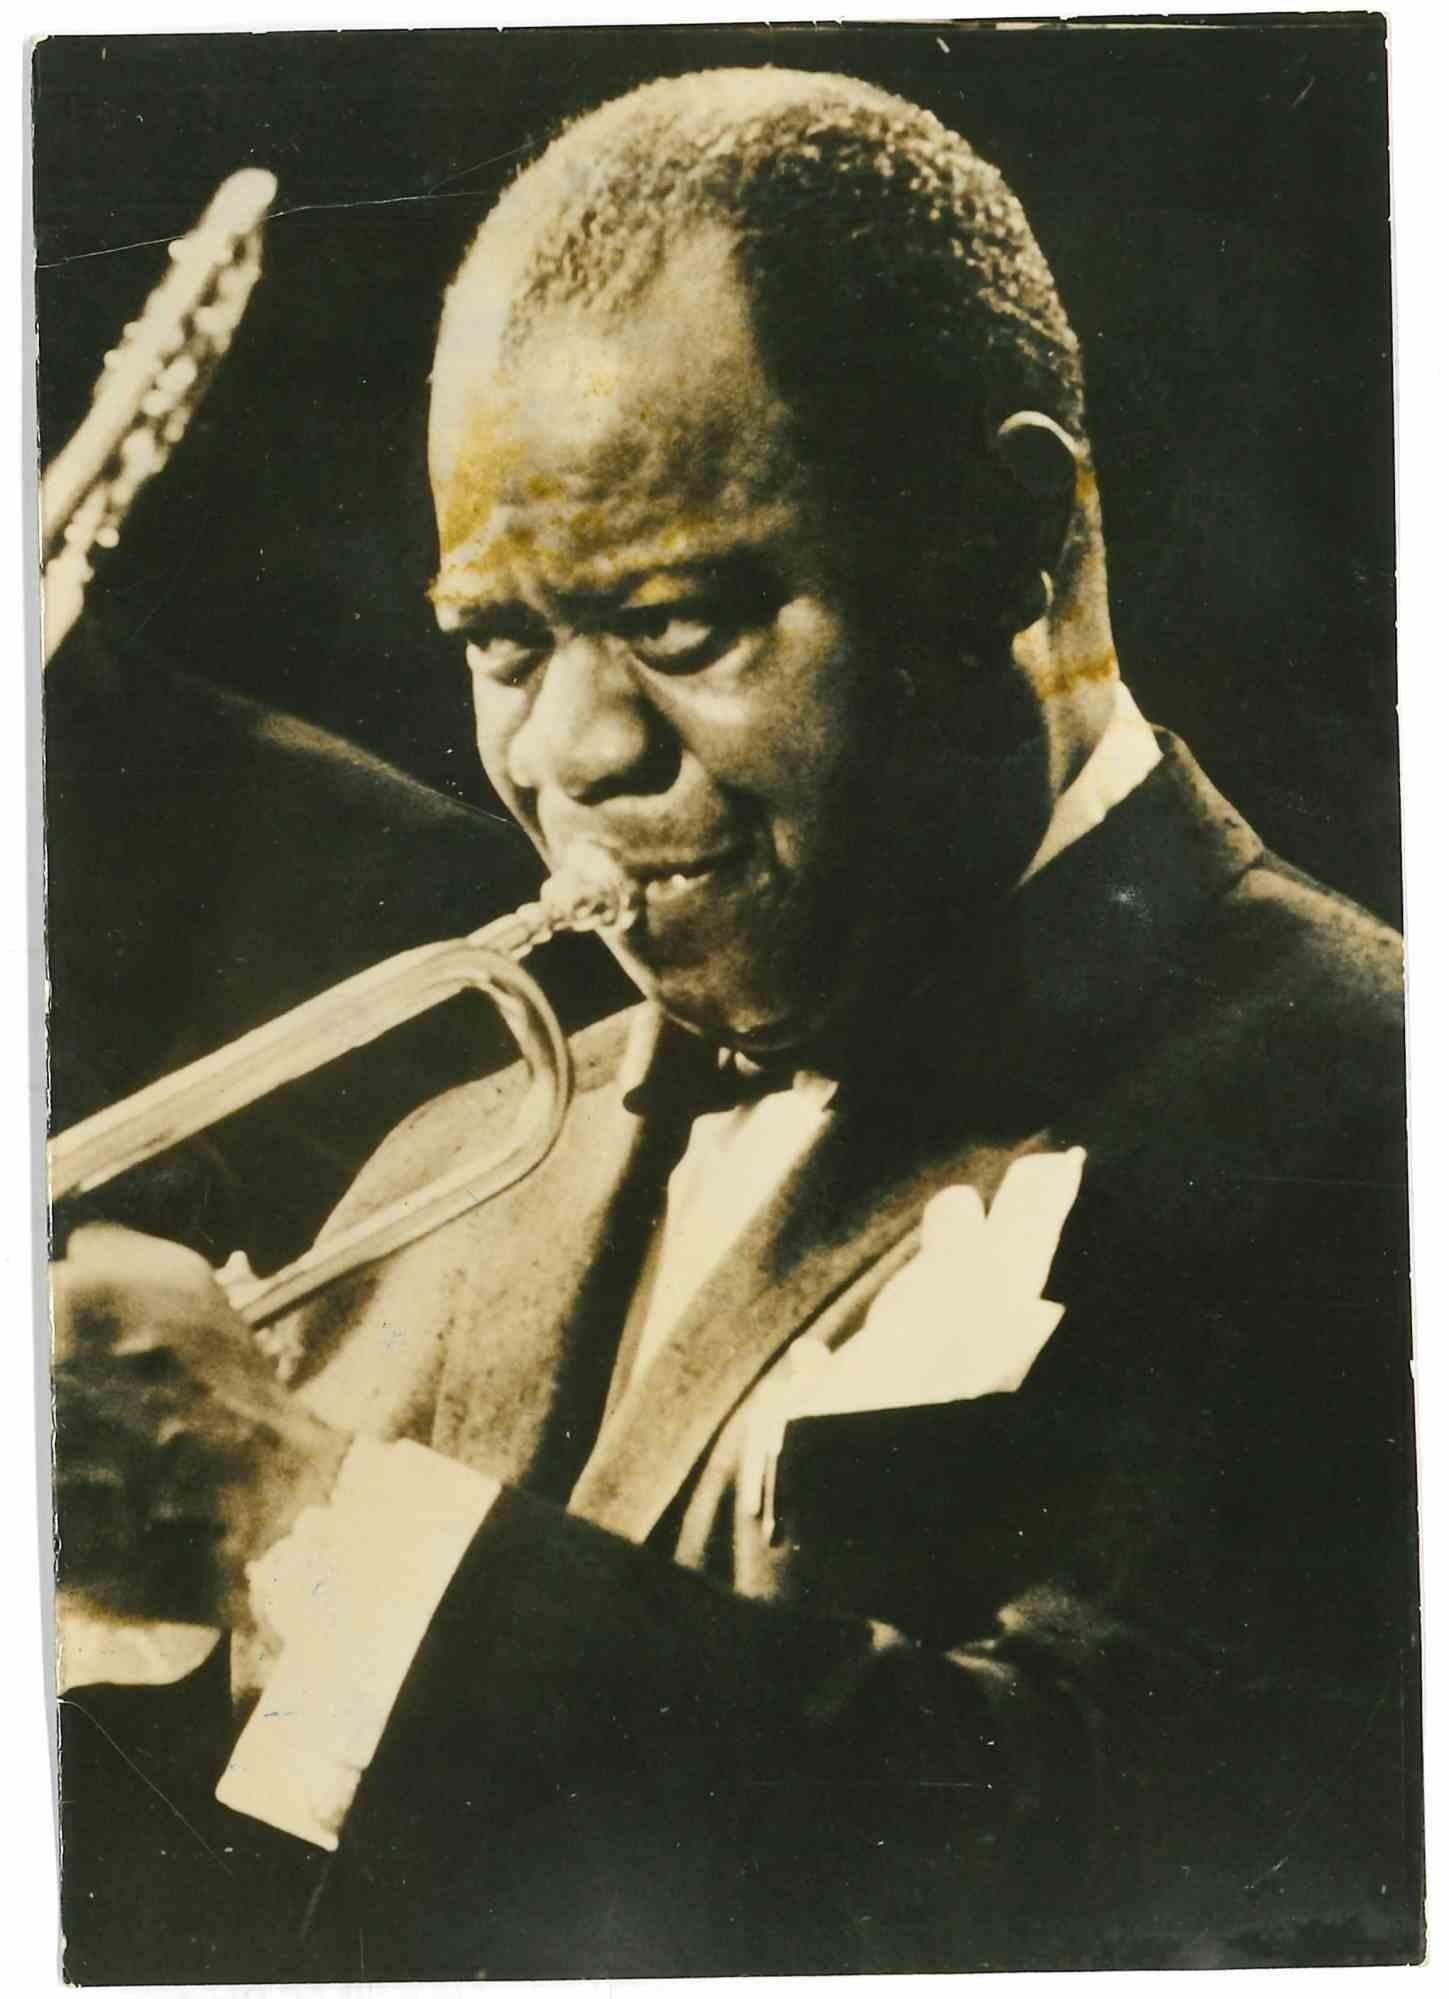  Louis Armstrong - Photo - 1960s